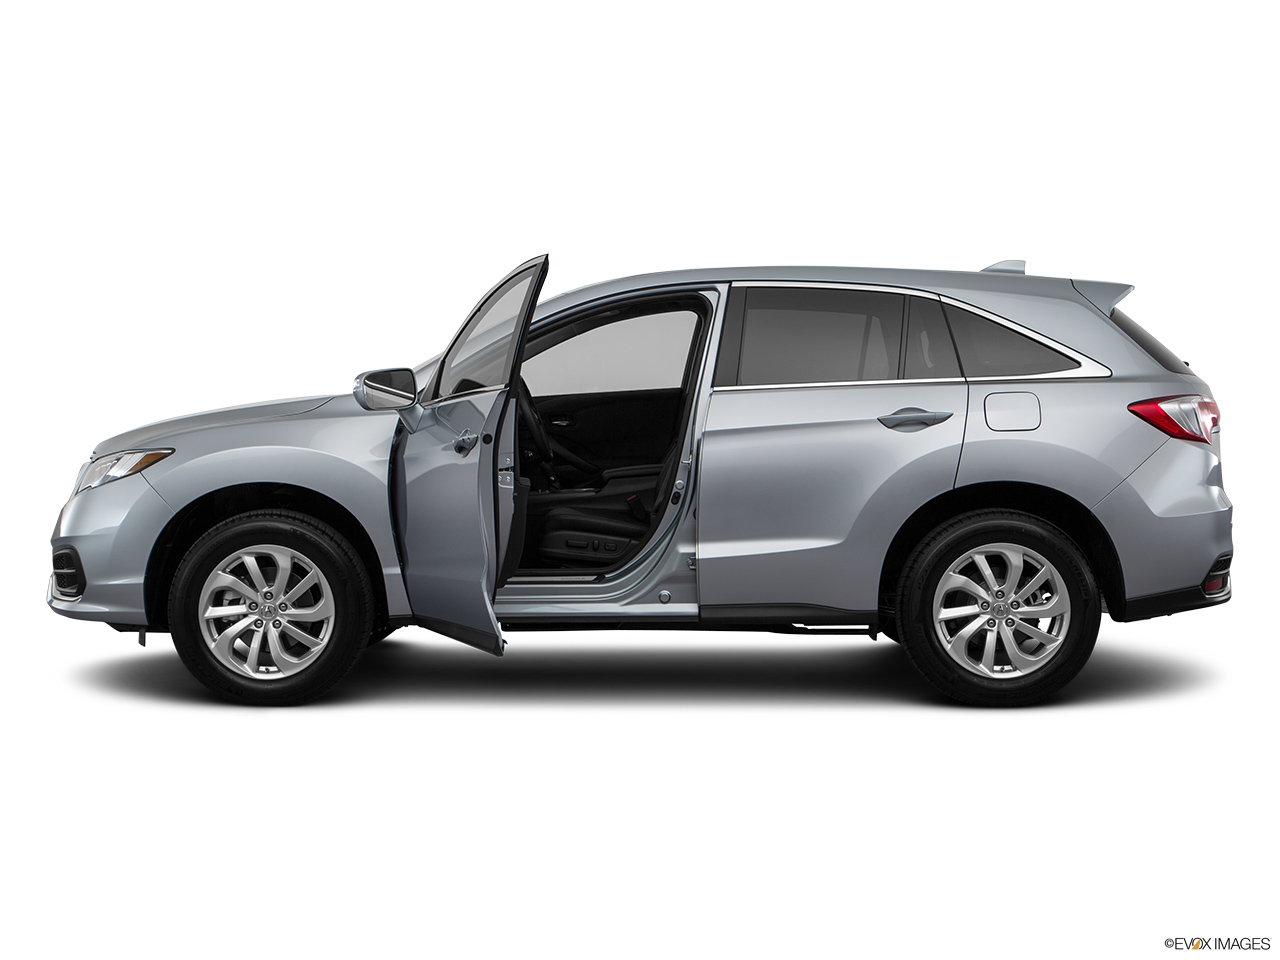 2017 Acura RDX AWD Driver's side profile with drivers side door open. 